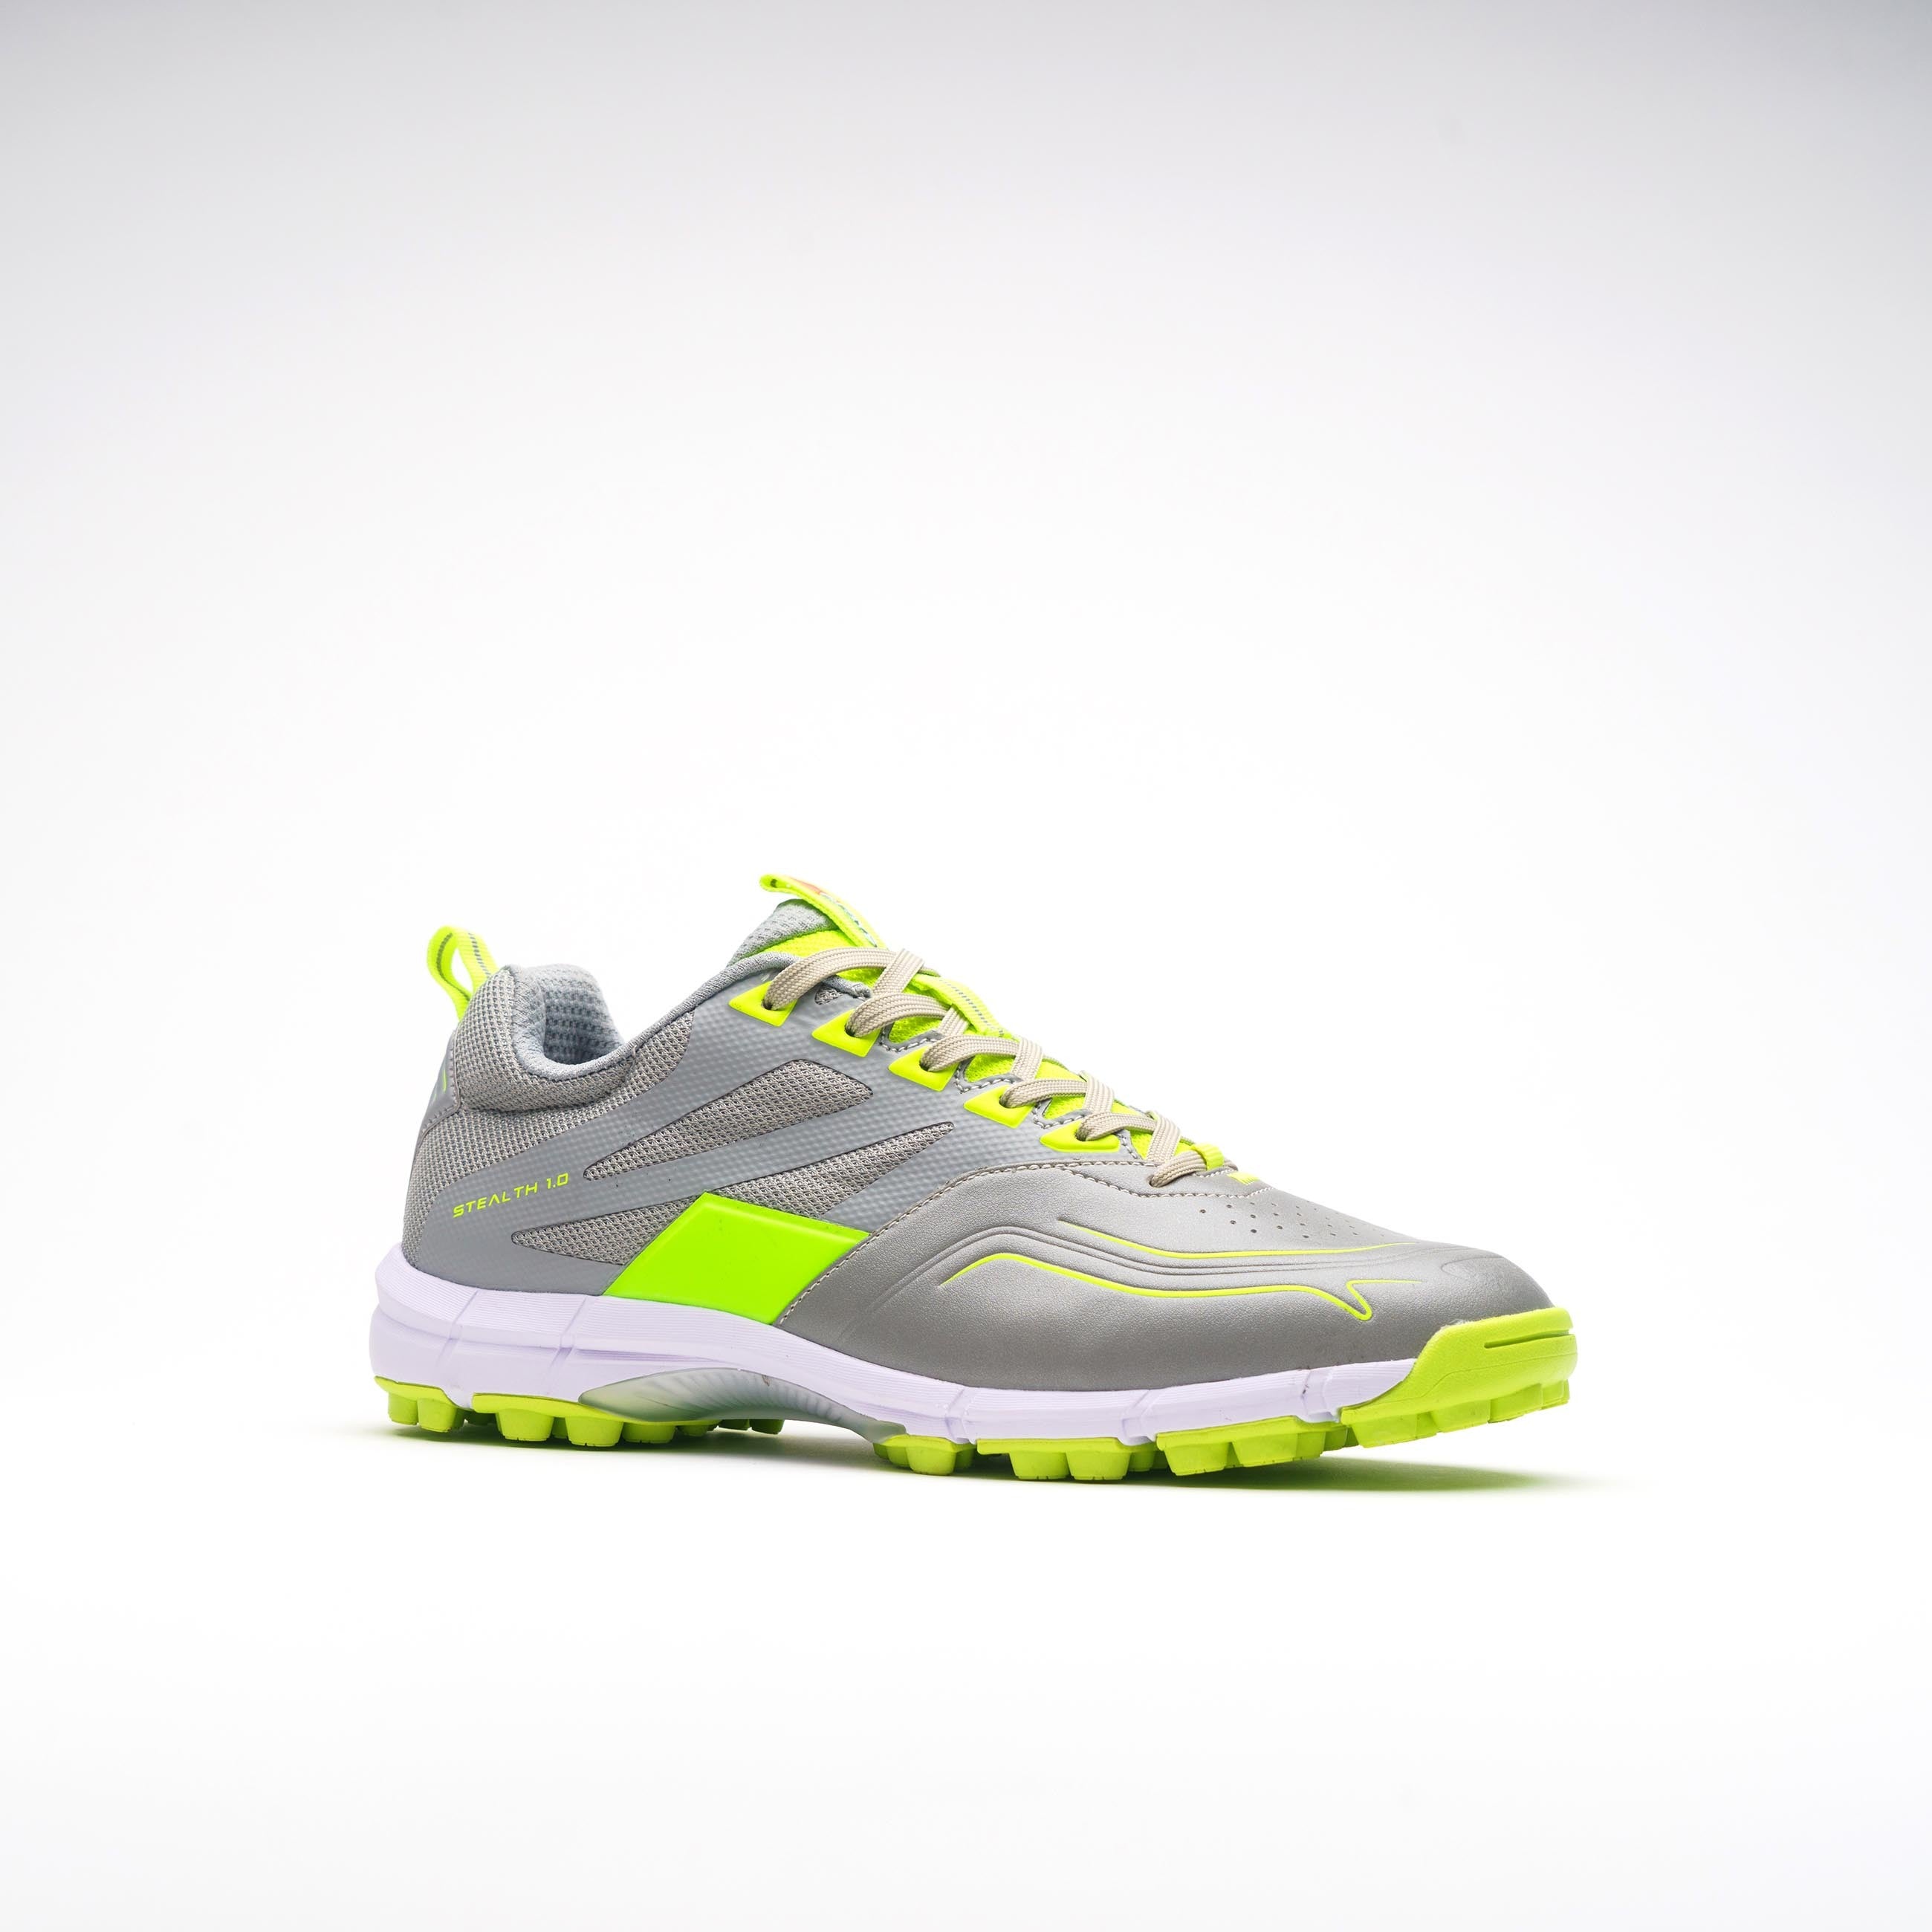 HSED24Shoes Stealth 1.0 Grey Fl Yellow, Outstep Toe